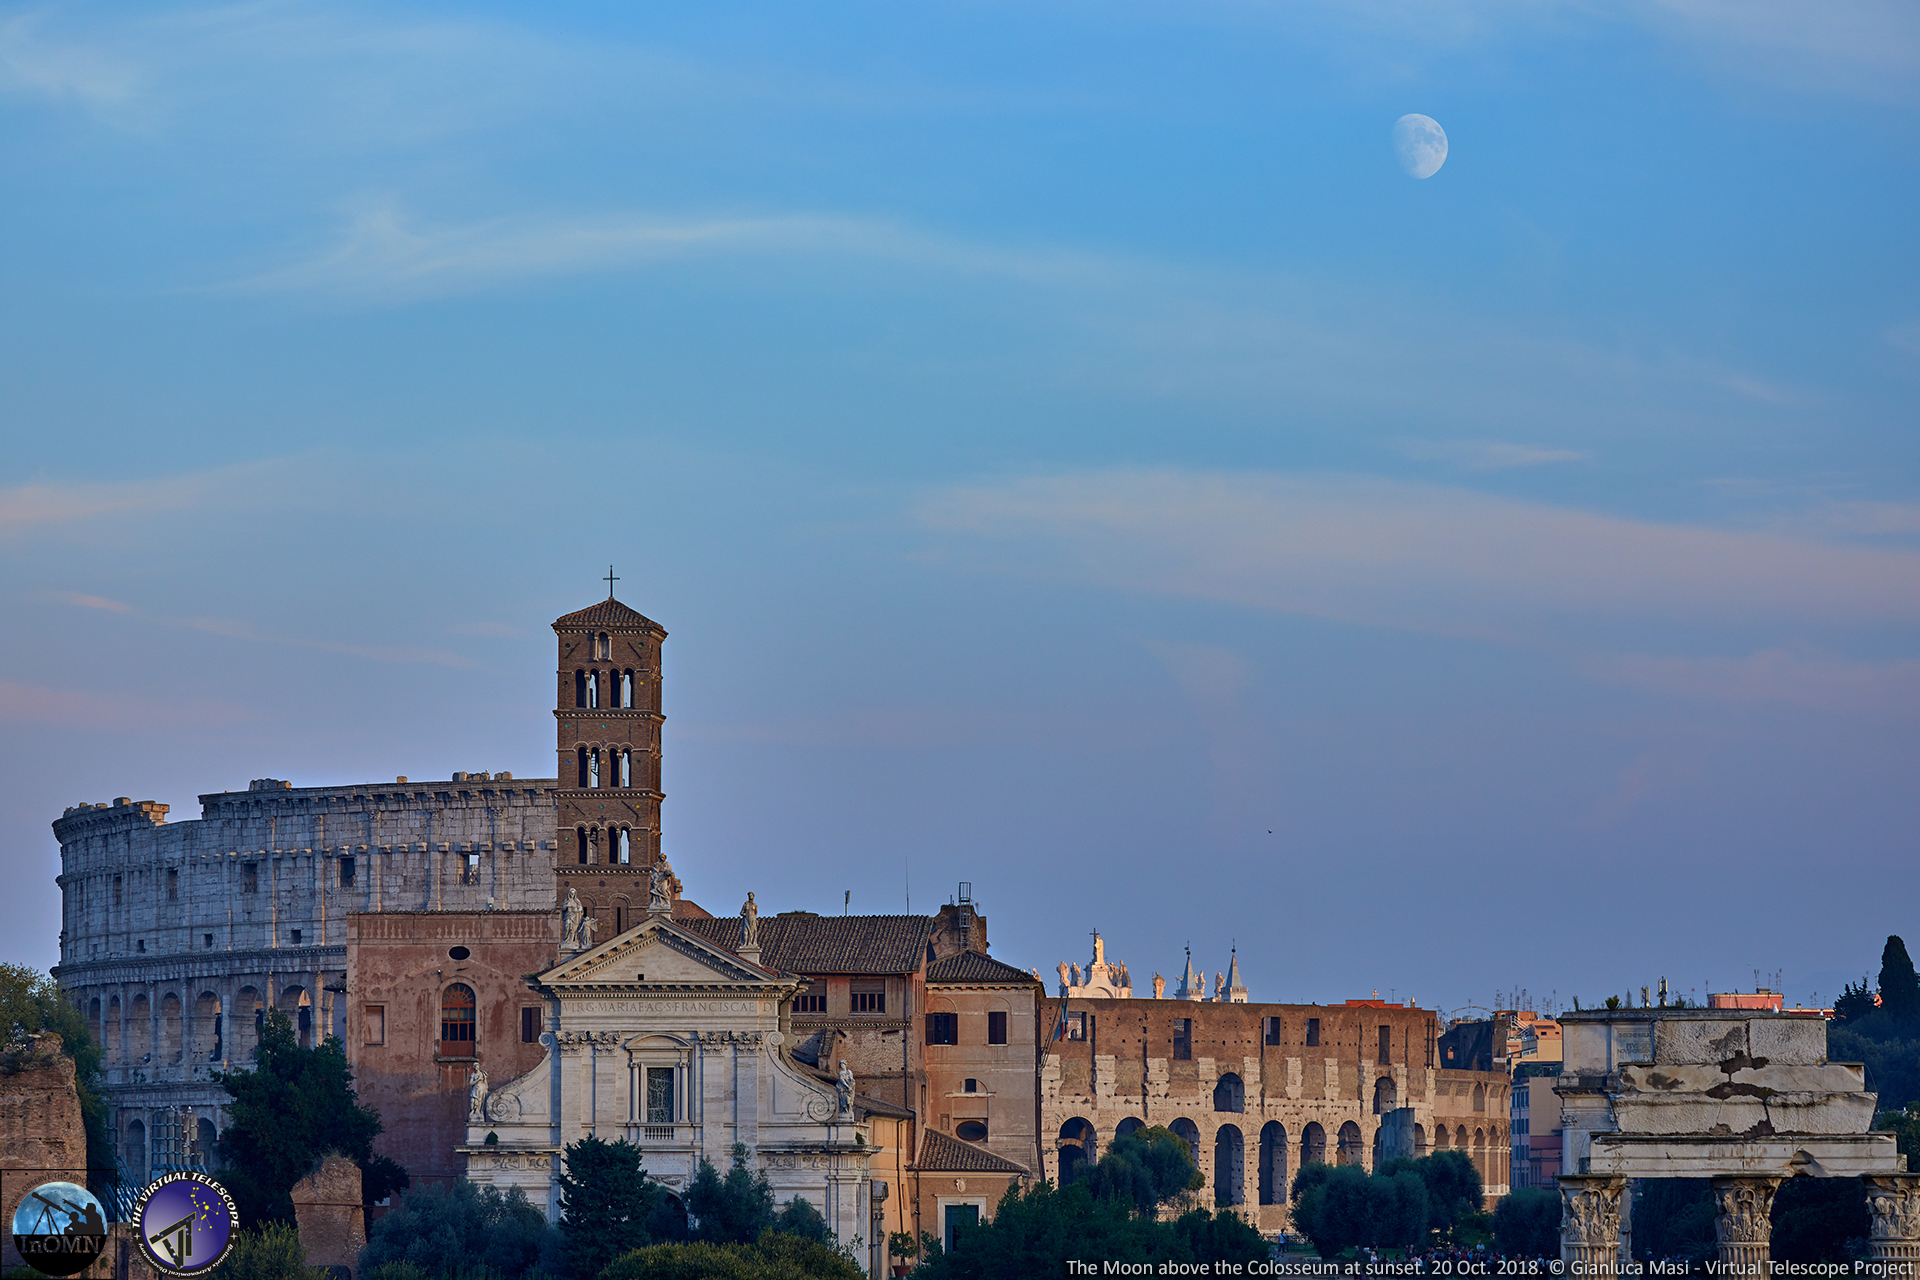 A pale Moon hangs above the Colosseum at sunset - 20 Oct. 2018